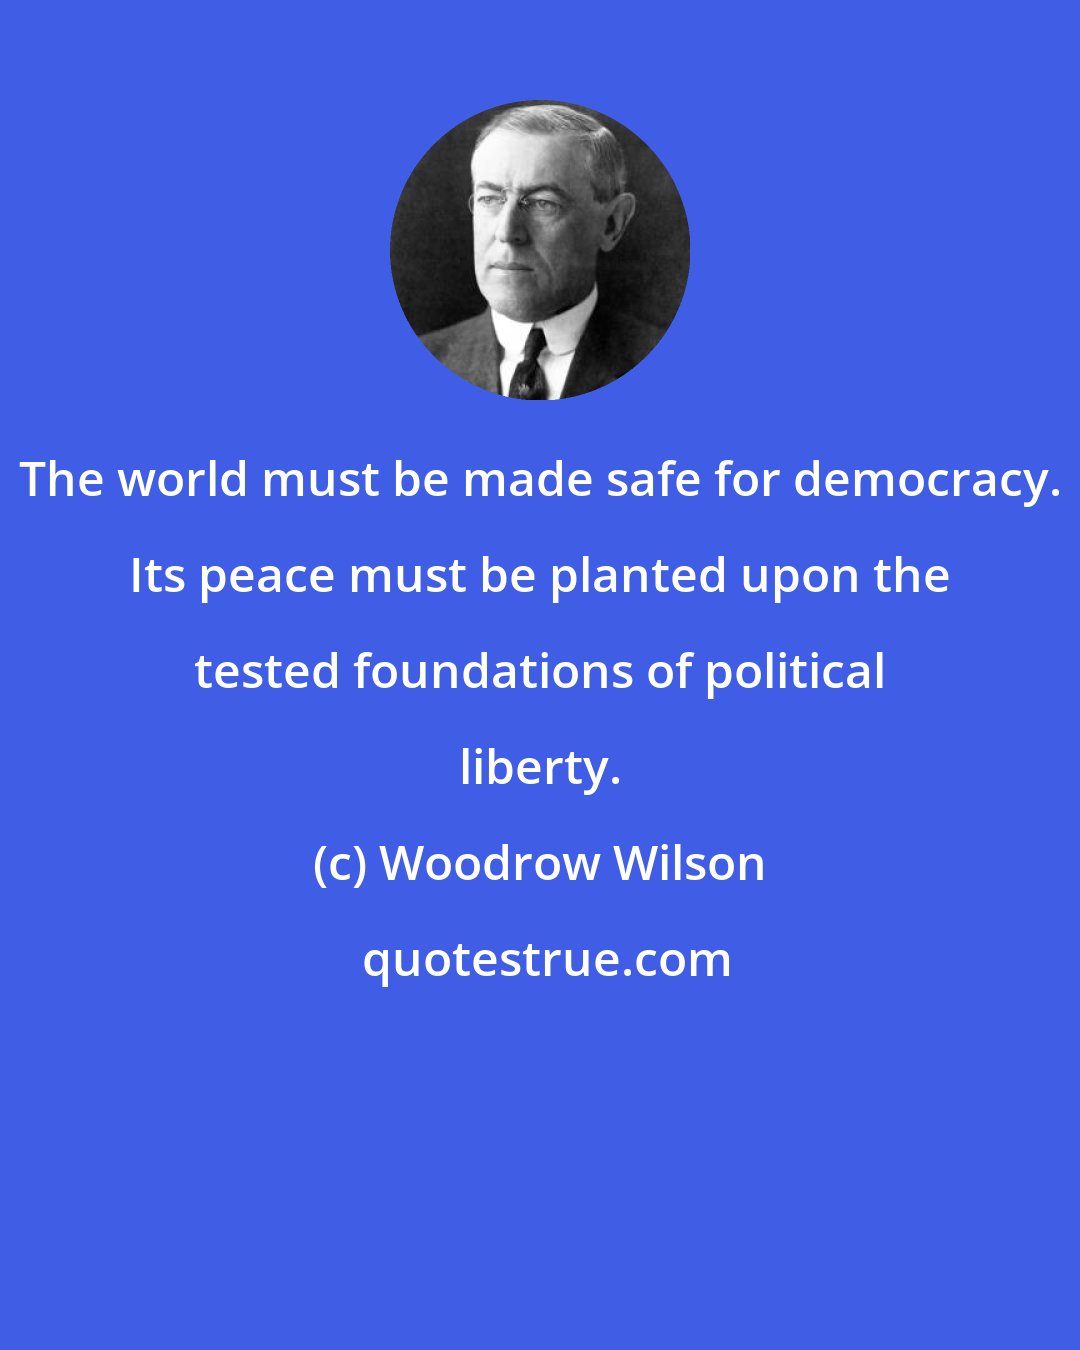 Woodrow Wilson: The world must be made safe for democracy. Its peace must be planted upon the tested foundations of political liberty.